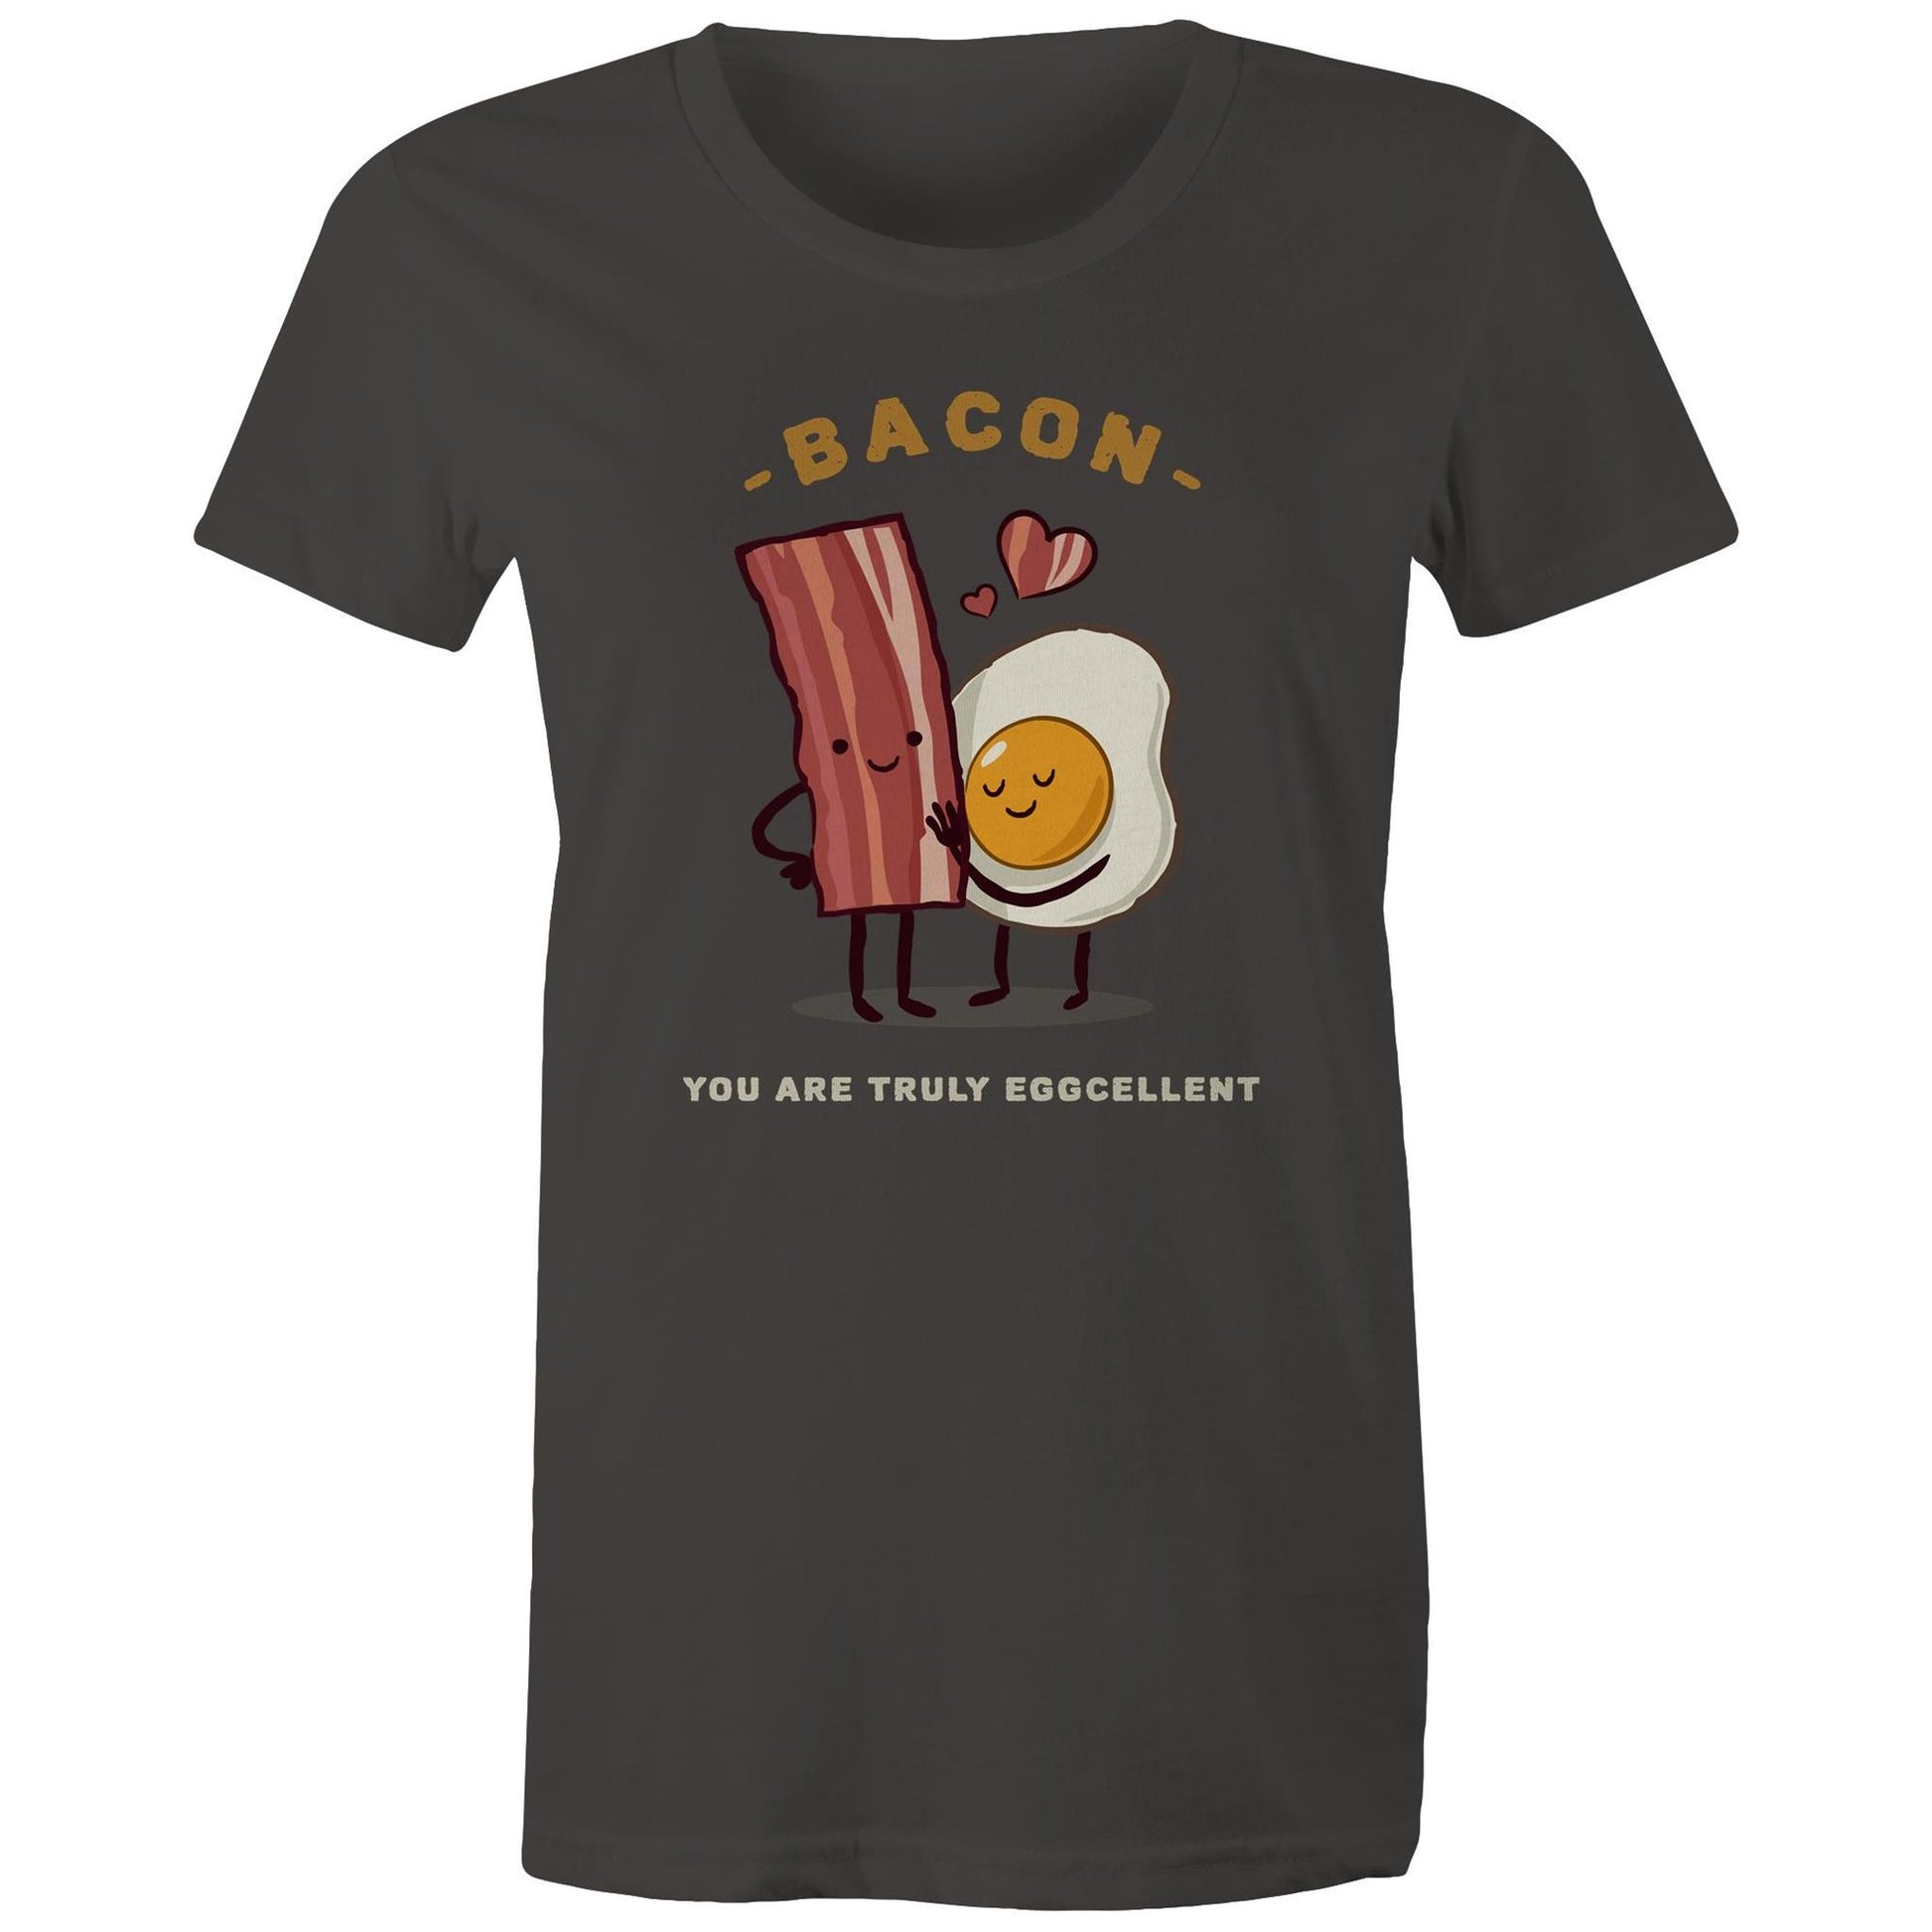 Bacon, You Are Truly Eggcellent - Womens T-shirt Charcoal Womens T-shirt Food